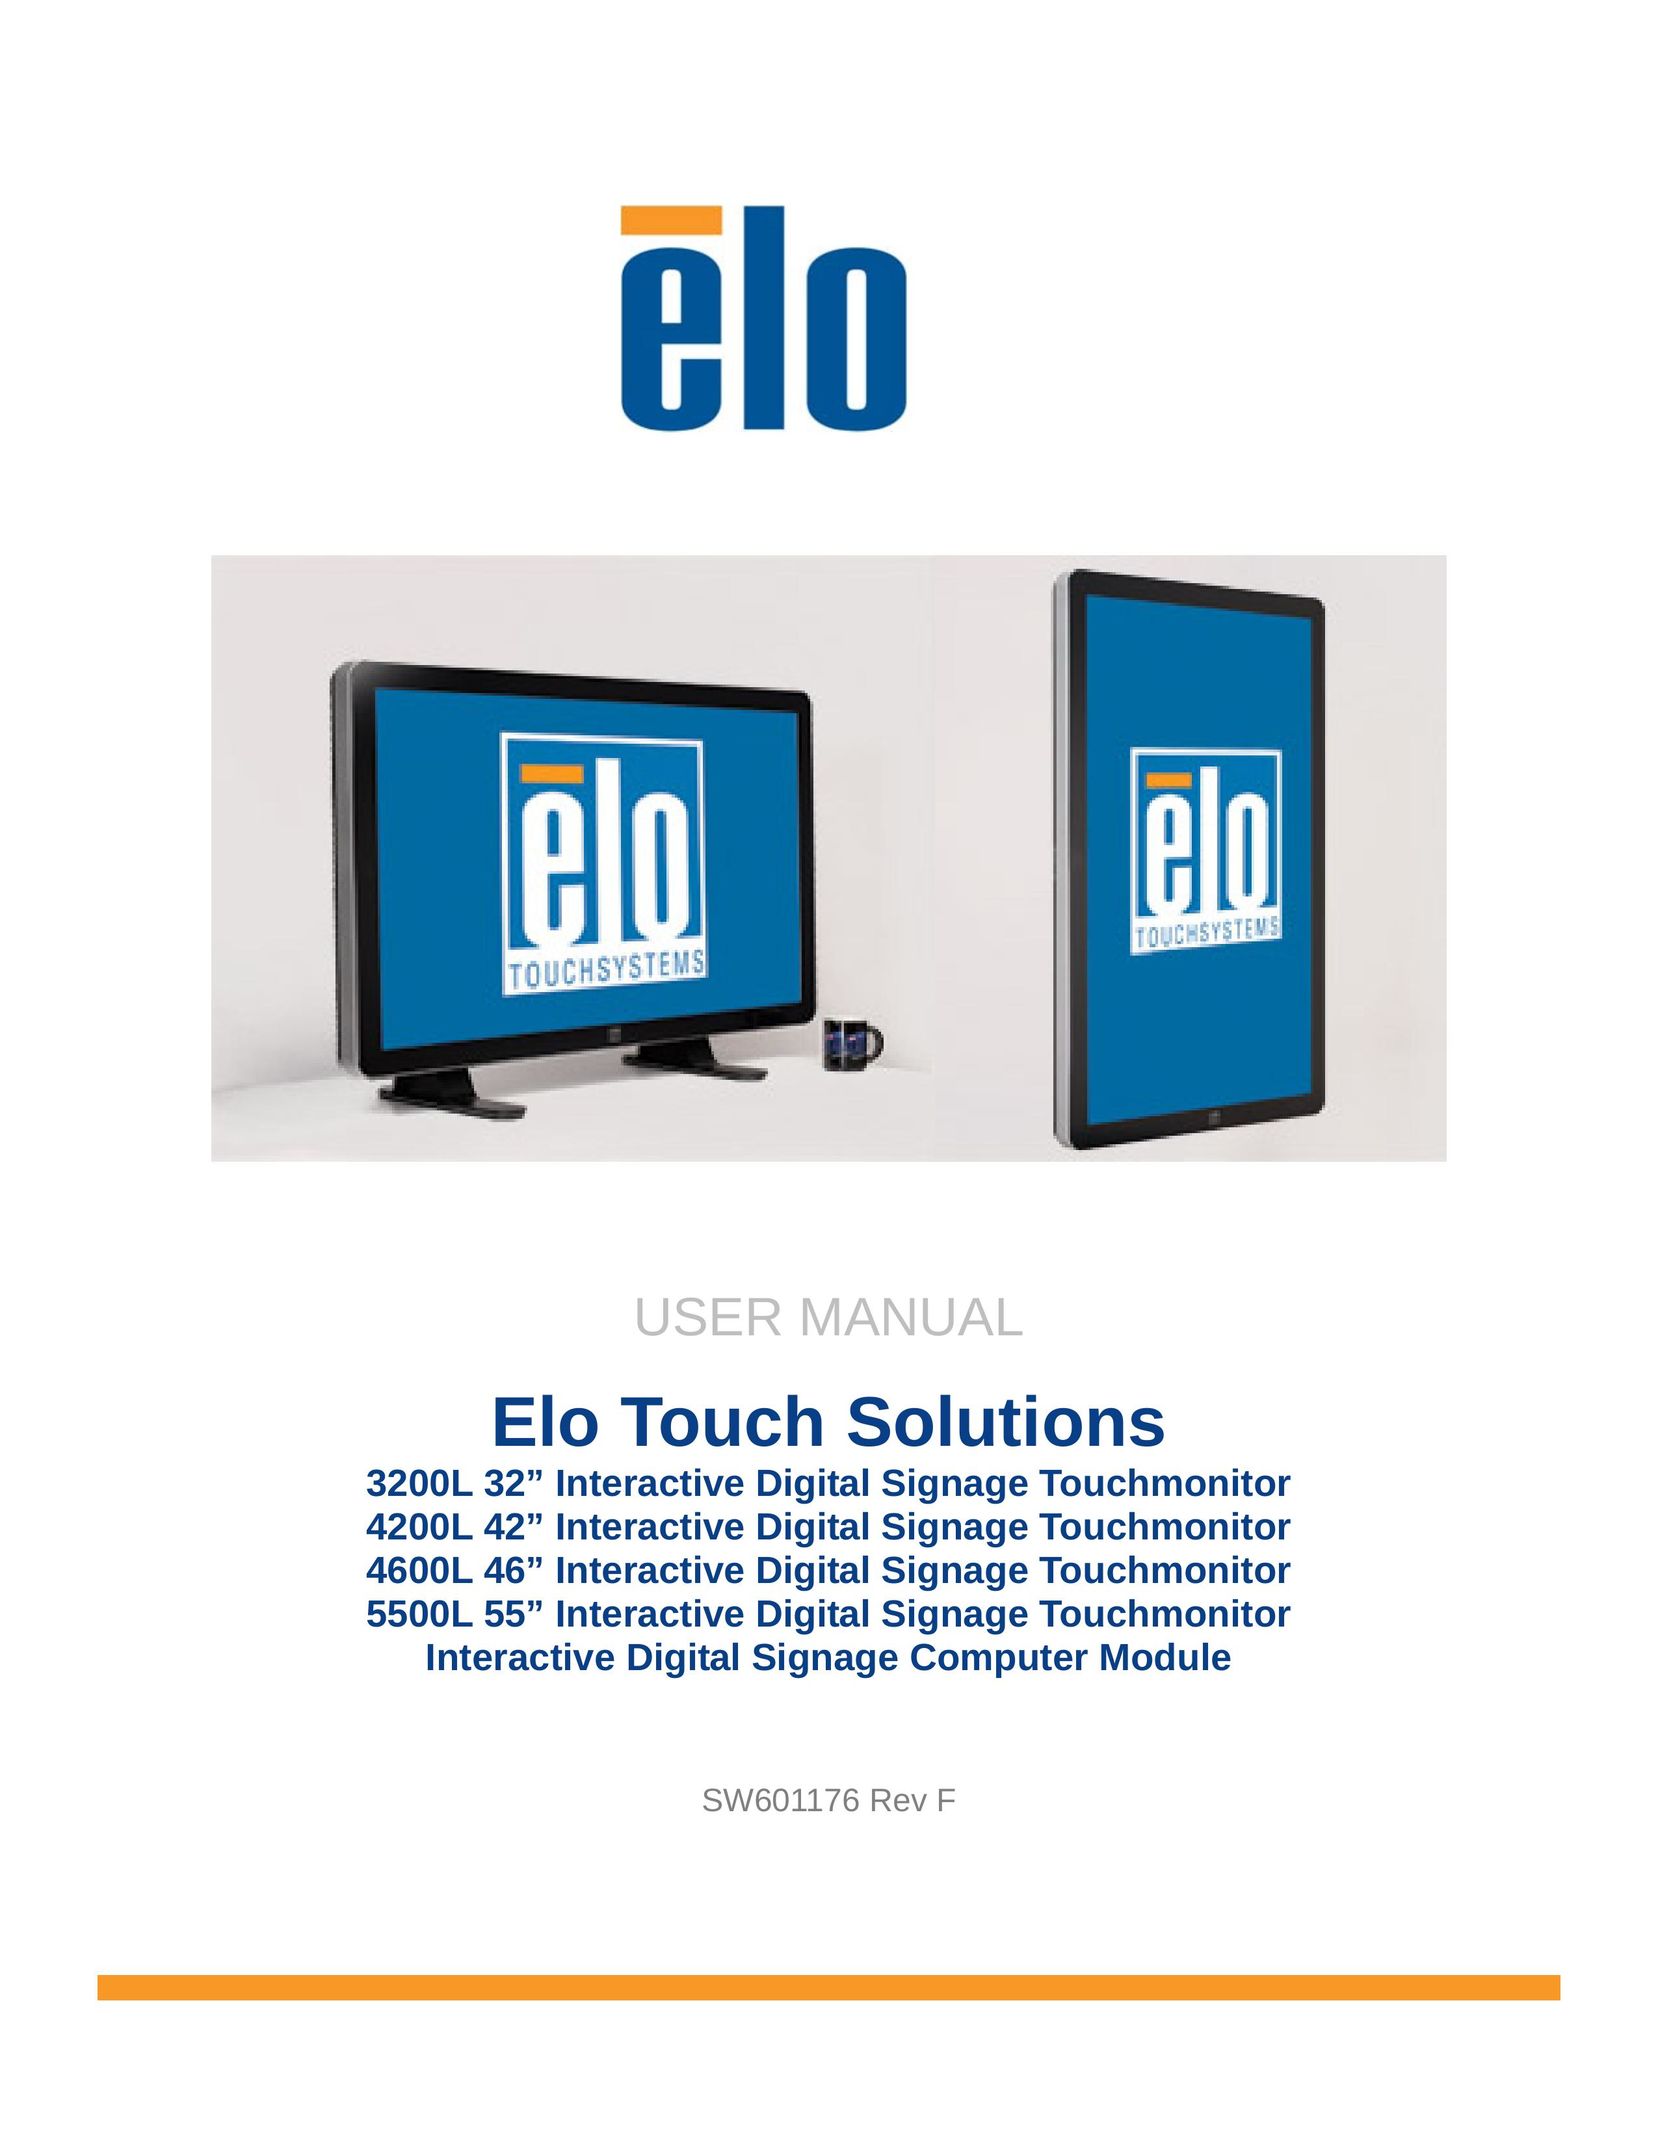 Elo TouchSystems 4600L Car Video System User Manual